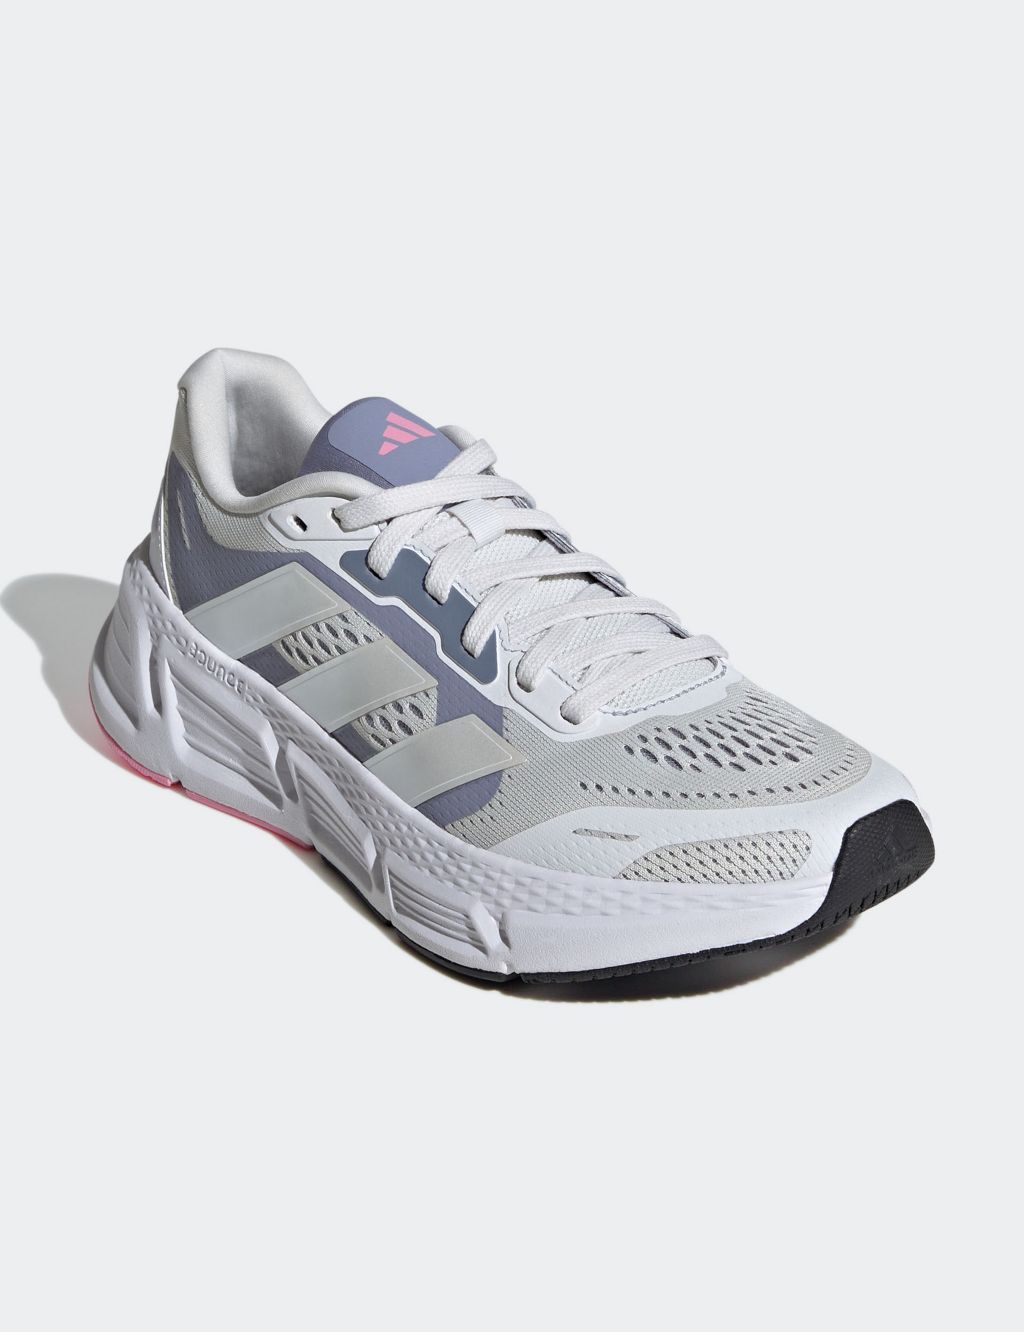 Questar 2 Bounce Running Trainers image 2